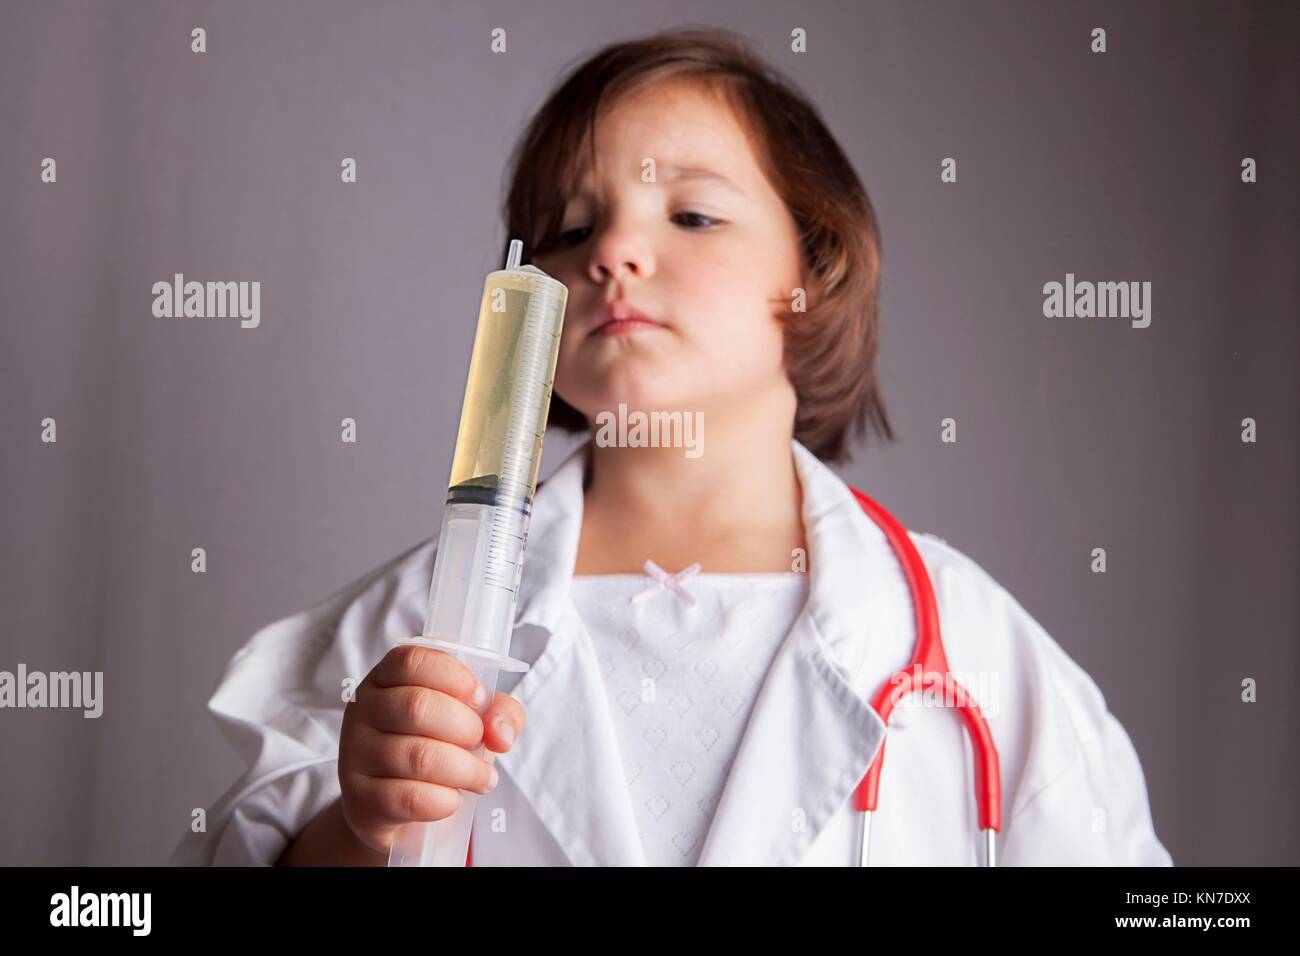 Little girl dressed as a doctor holding a huge syringe. Isolated over white background. Stock Photo